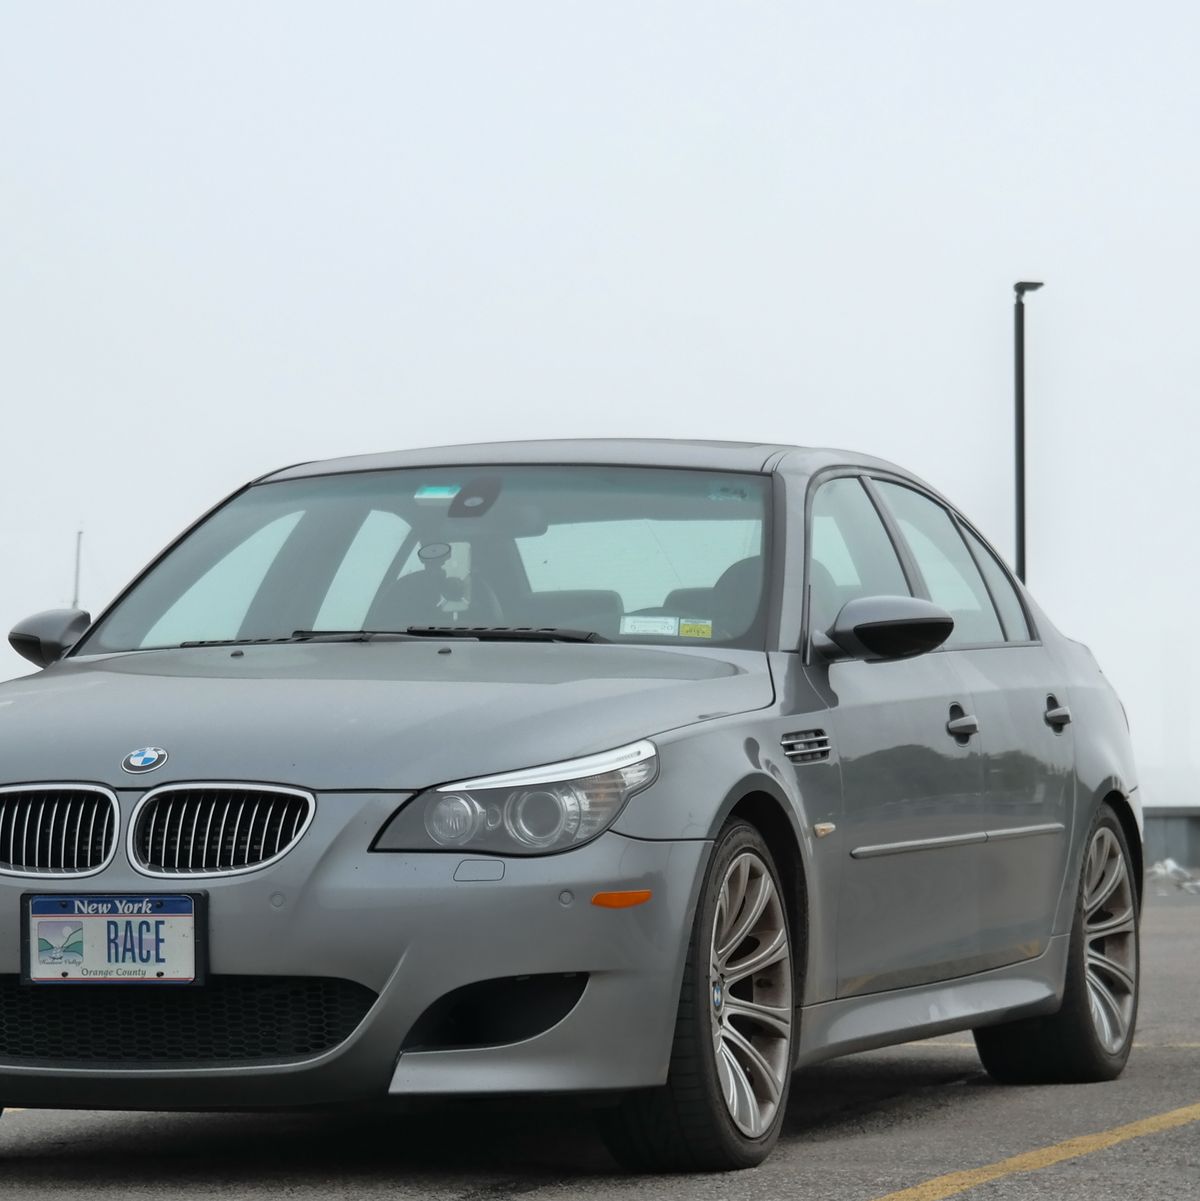 Here's How Much BMW M5 You Get for $10,500